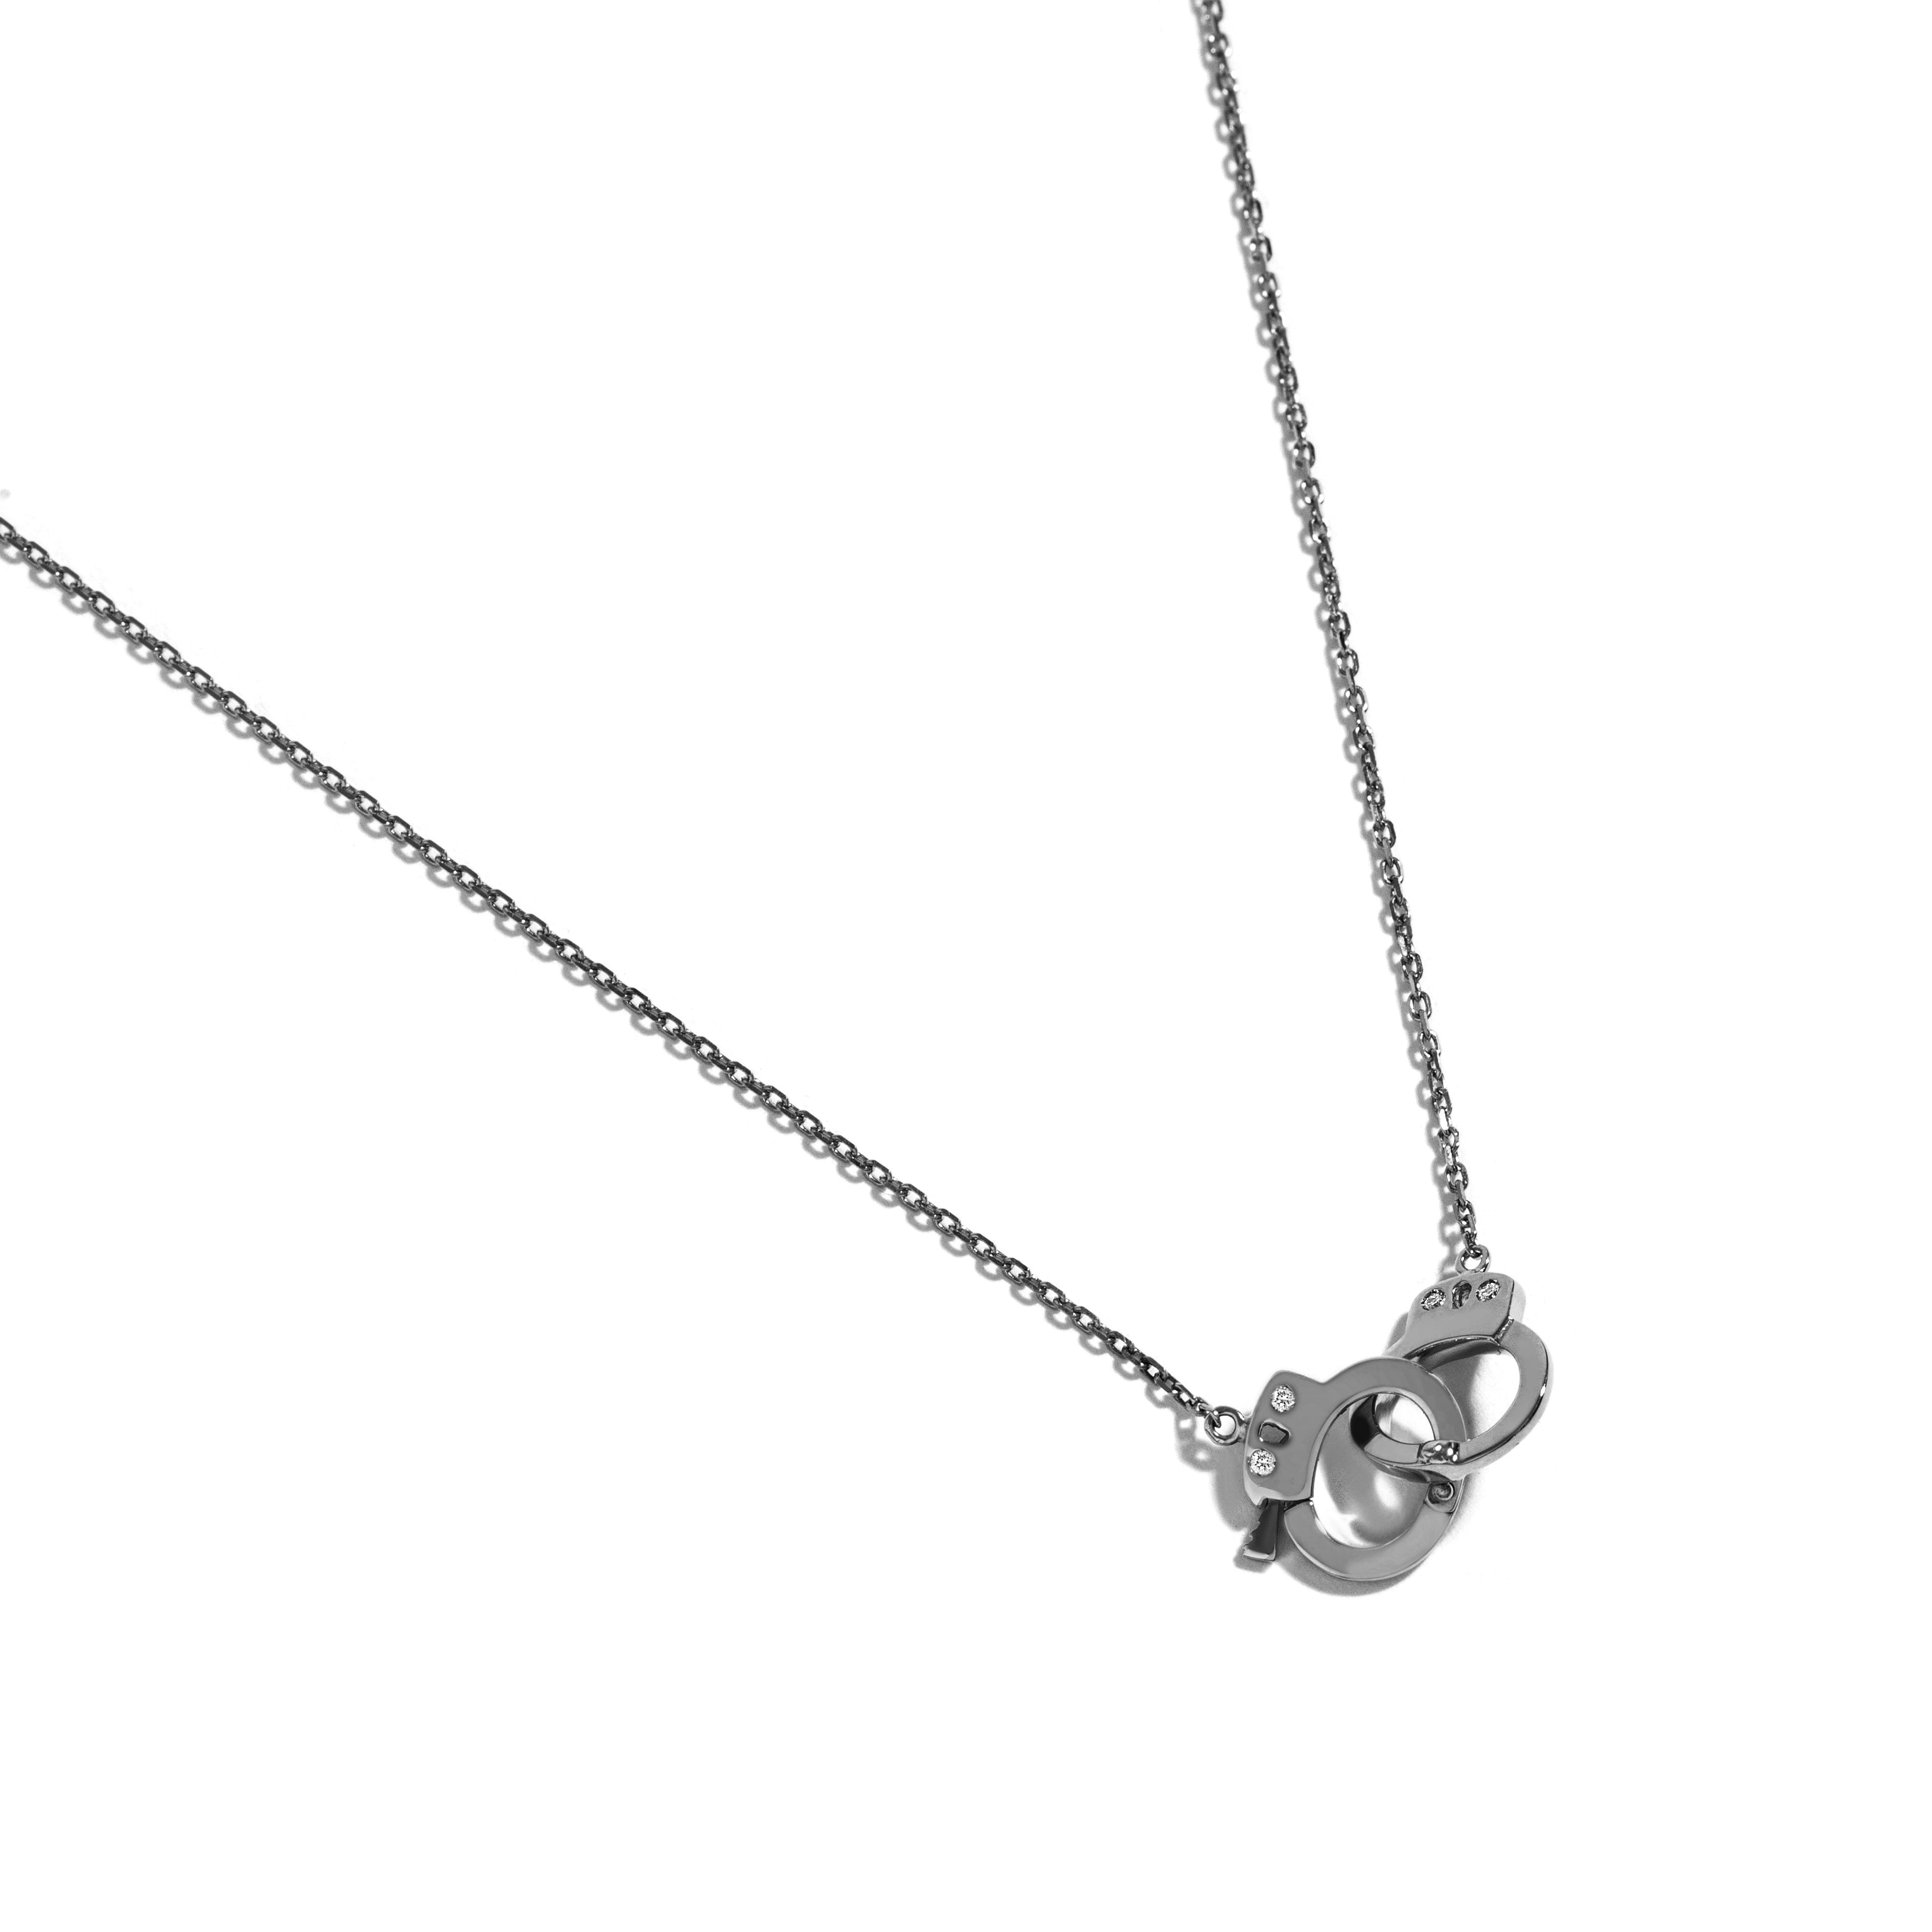 SMALL HANDCUFF  NECKLACE IN BLACK RHODIUM PLATED 18K WHITE GOLD WITH DIAMOND